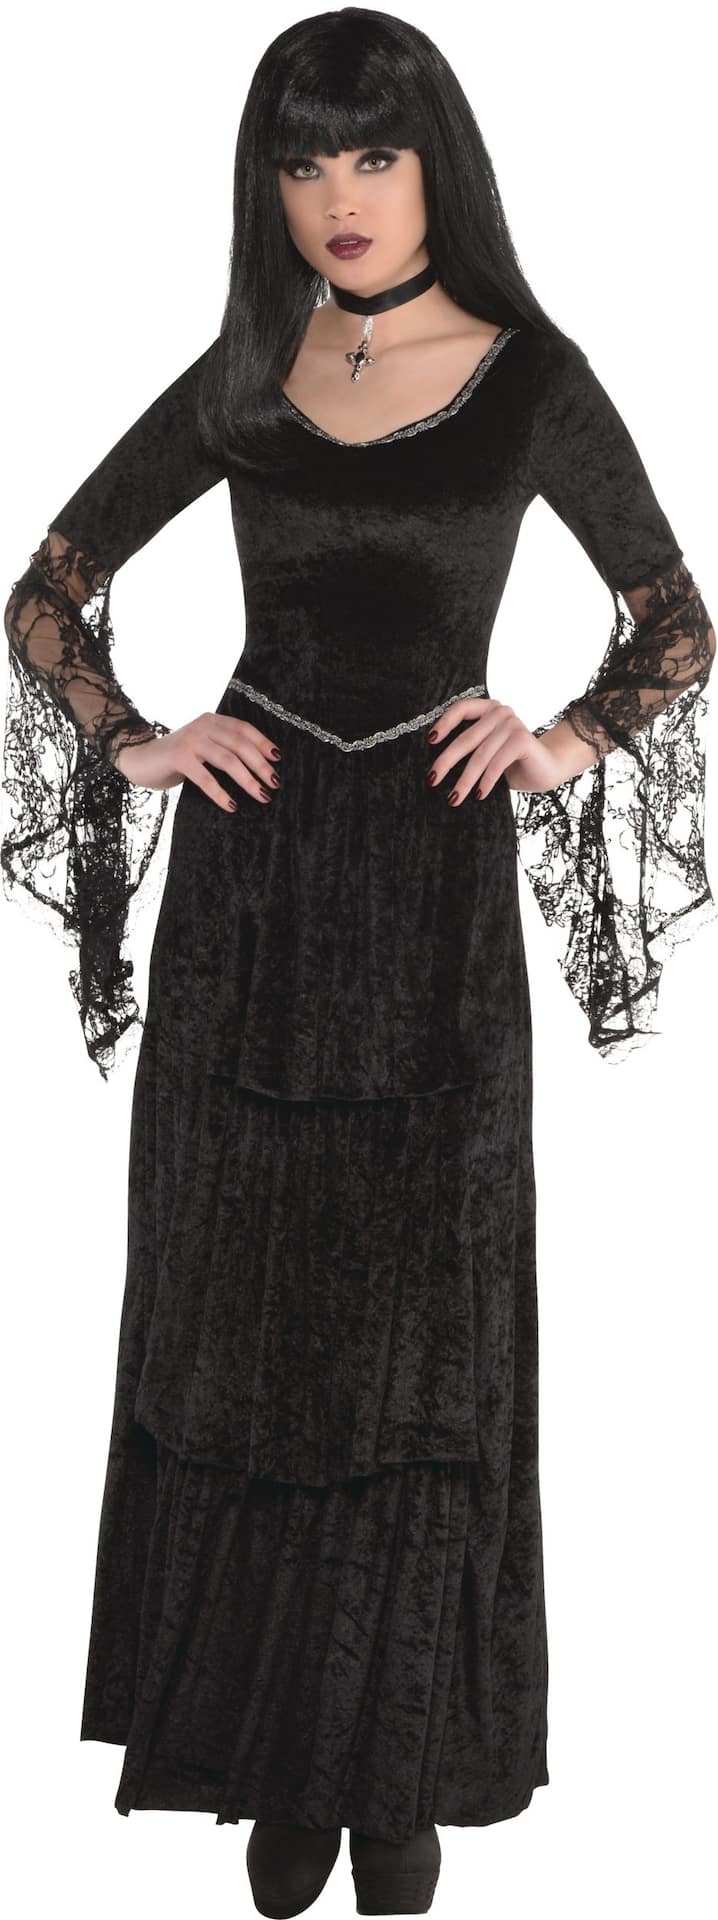 Women's Gothic Temptress Black Dress with Necklace Halloween Costume,  Assorted Sizes